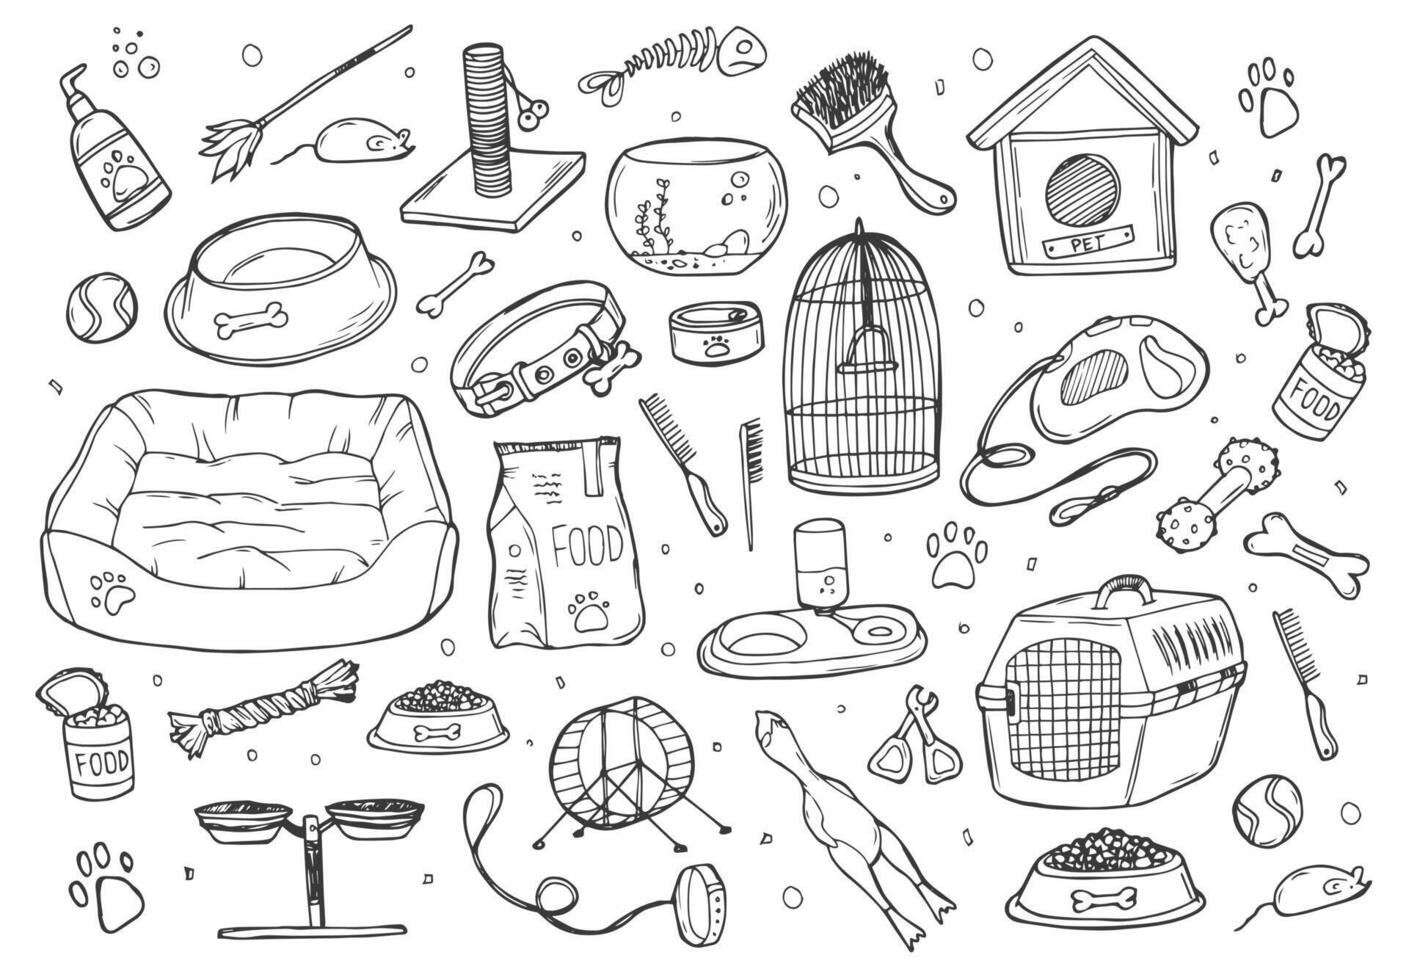 Hand drawn doodle Pets stuff and supply icons set. Vector illustration. Vet symbol collection. Cartoon dogs and cats care elements kennel, leash, food, paw,bowl, bone and other goods for pet shop